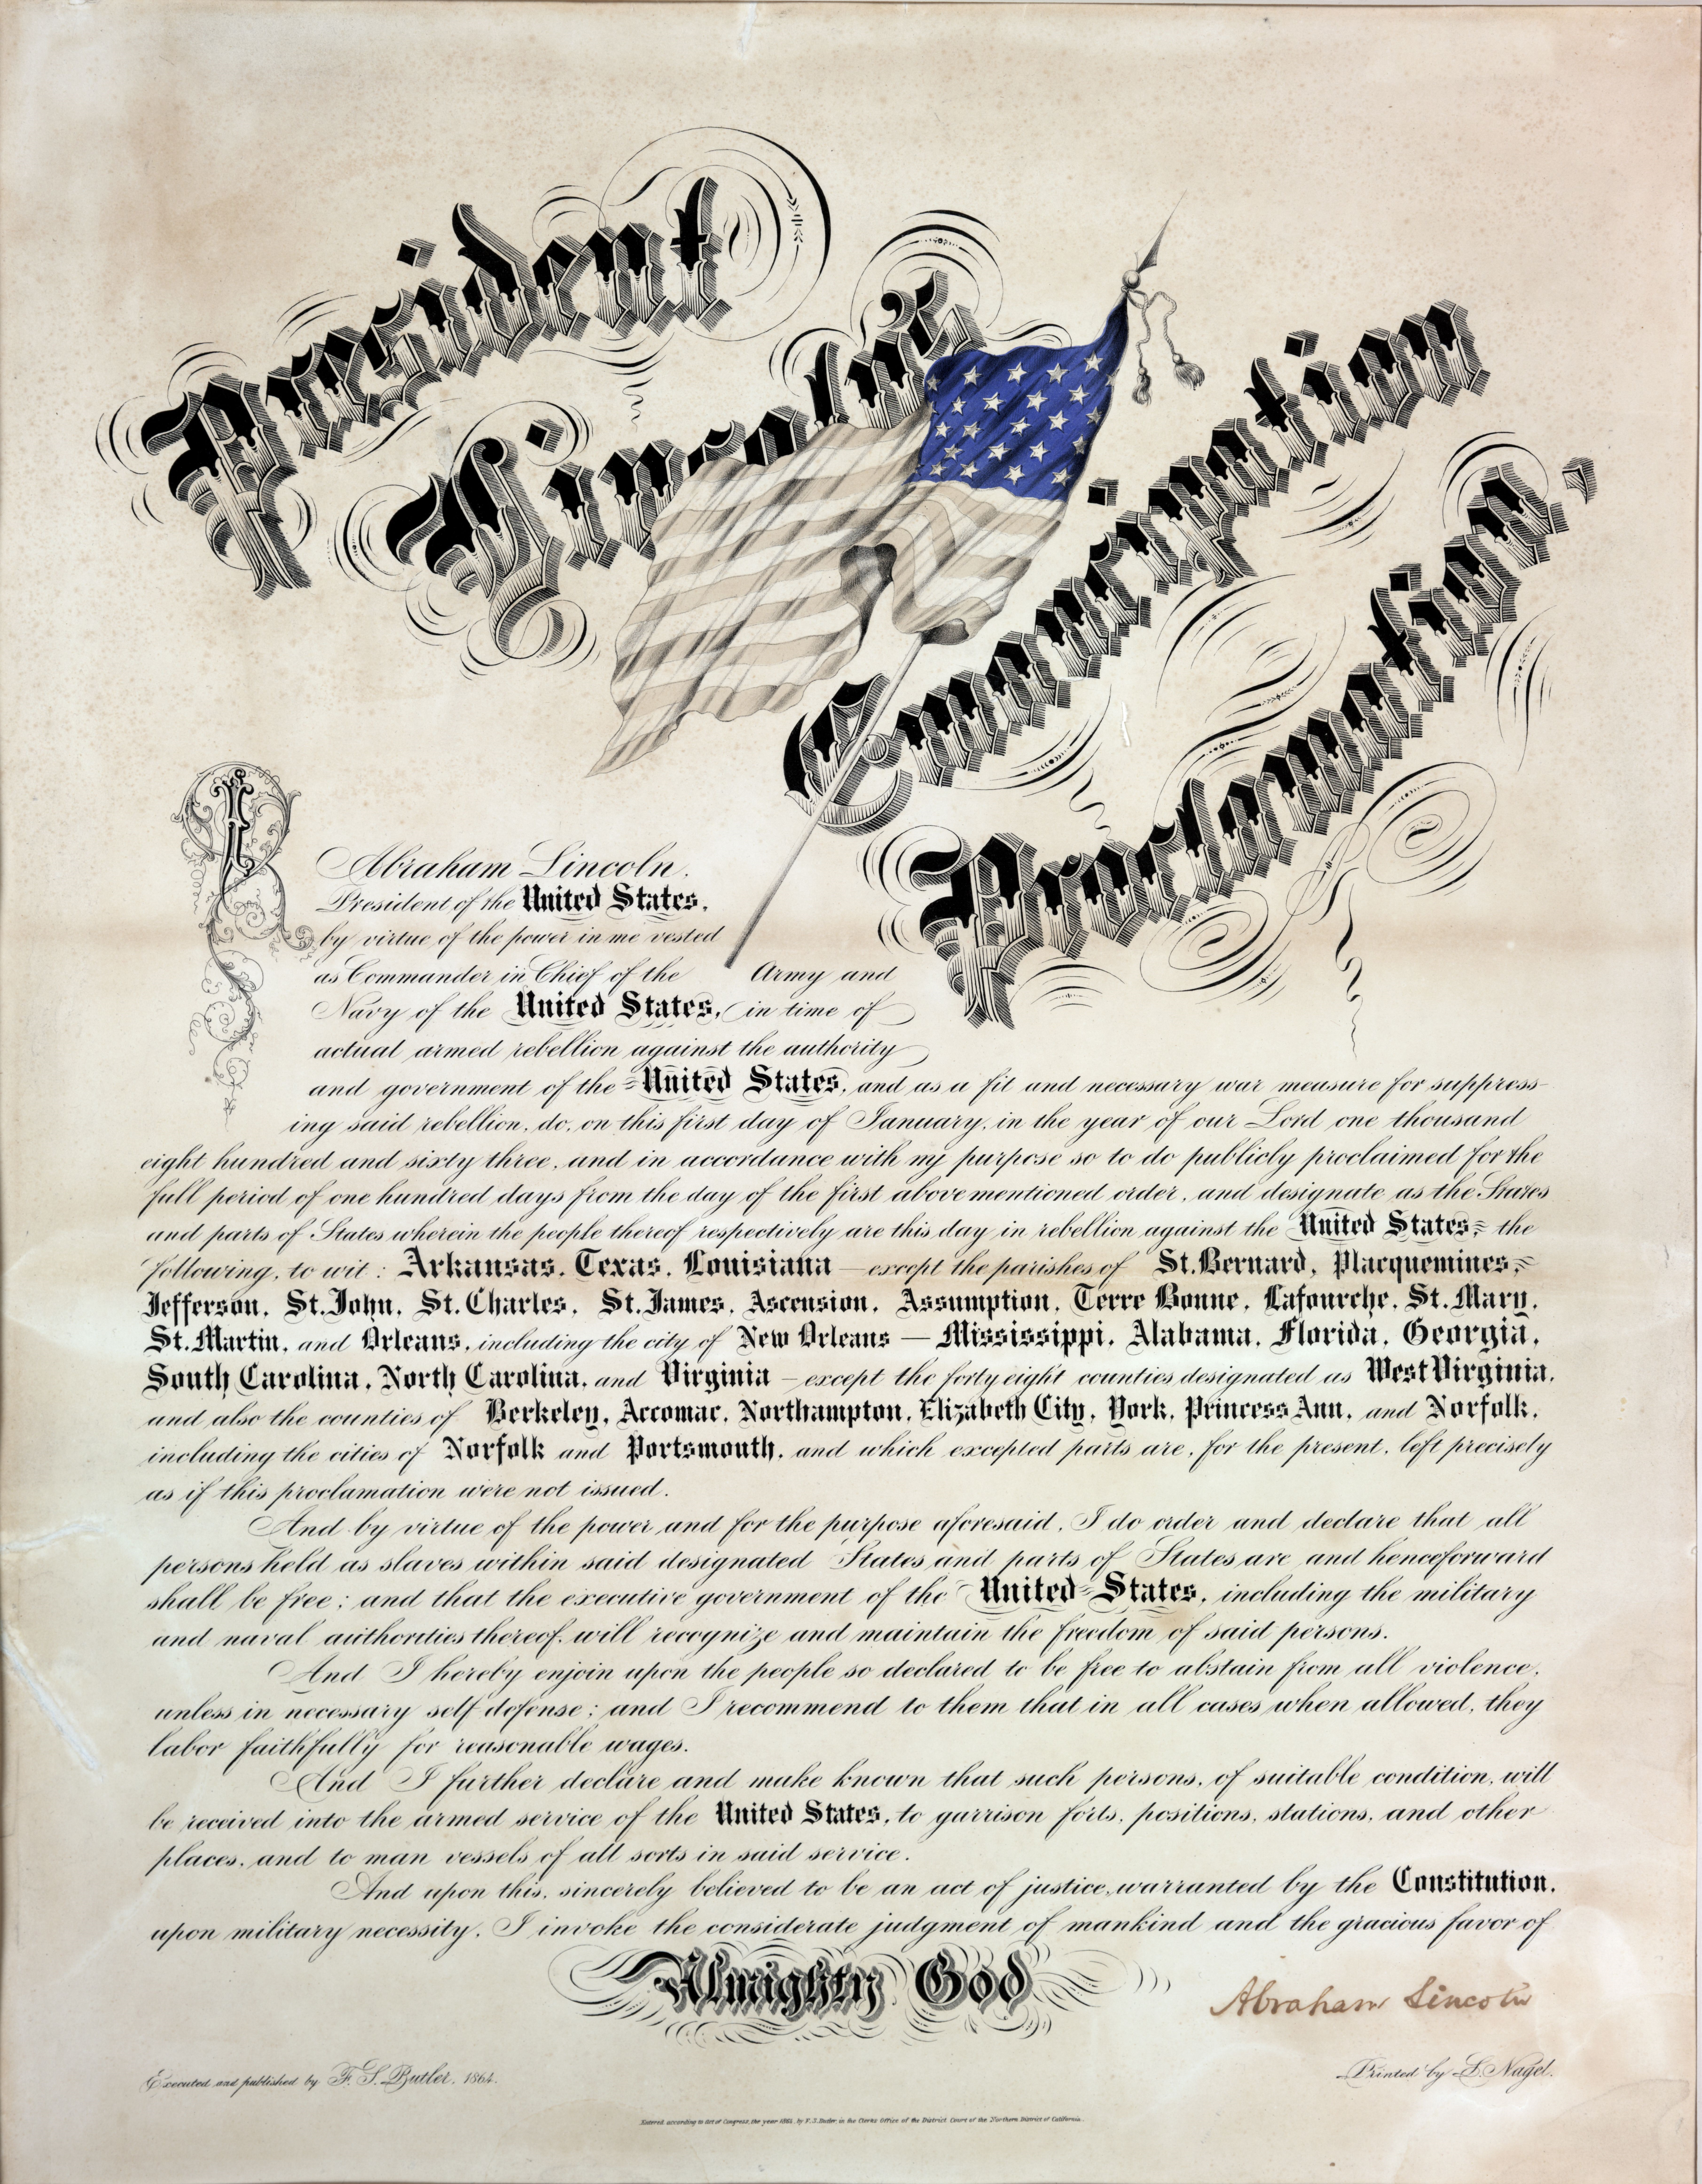 "Lincoln's Emancipation Proclamation" purportedly drafted by a fourteen-year-old boy and later signed by Lincoln (Gilder Lehrman Institute, GLC00742)